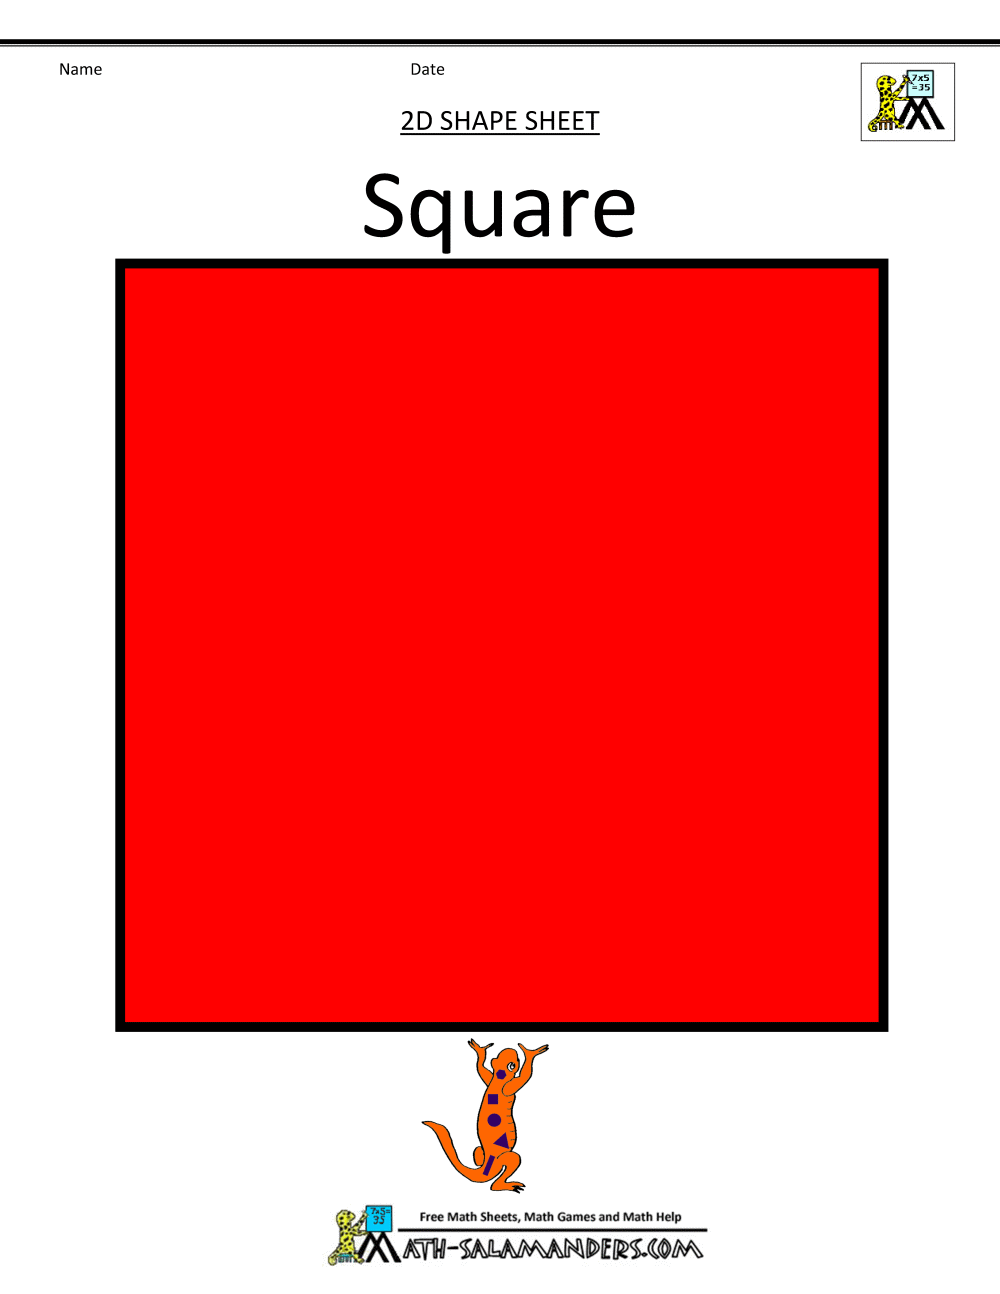 Squares clipart #1, Download drawings